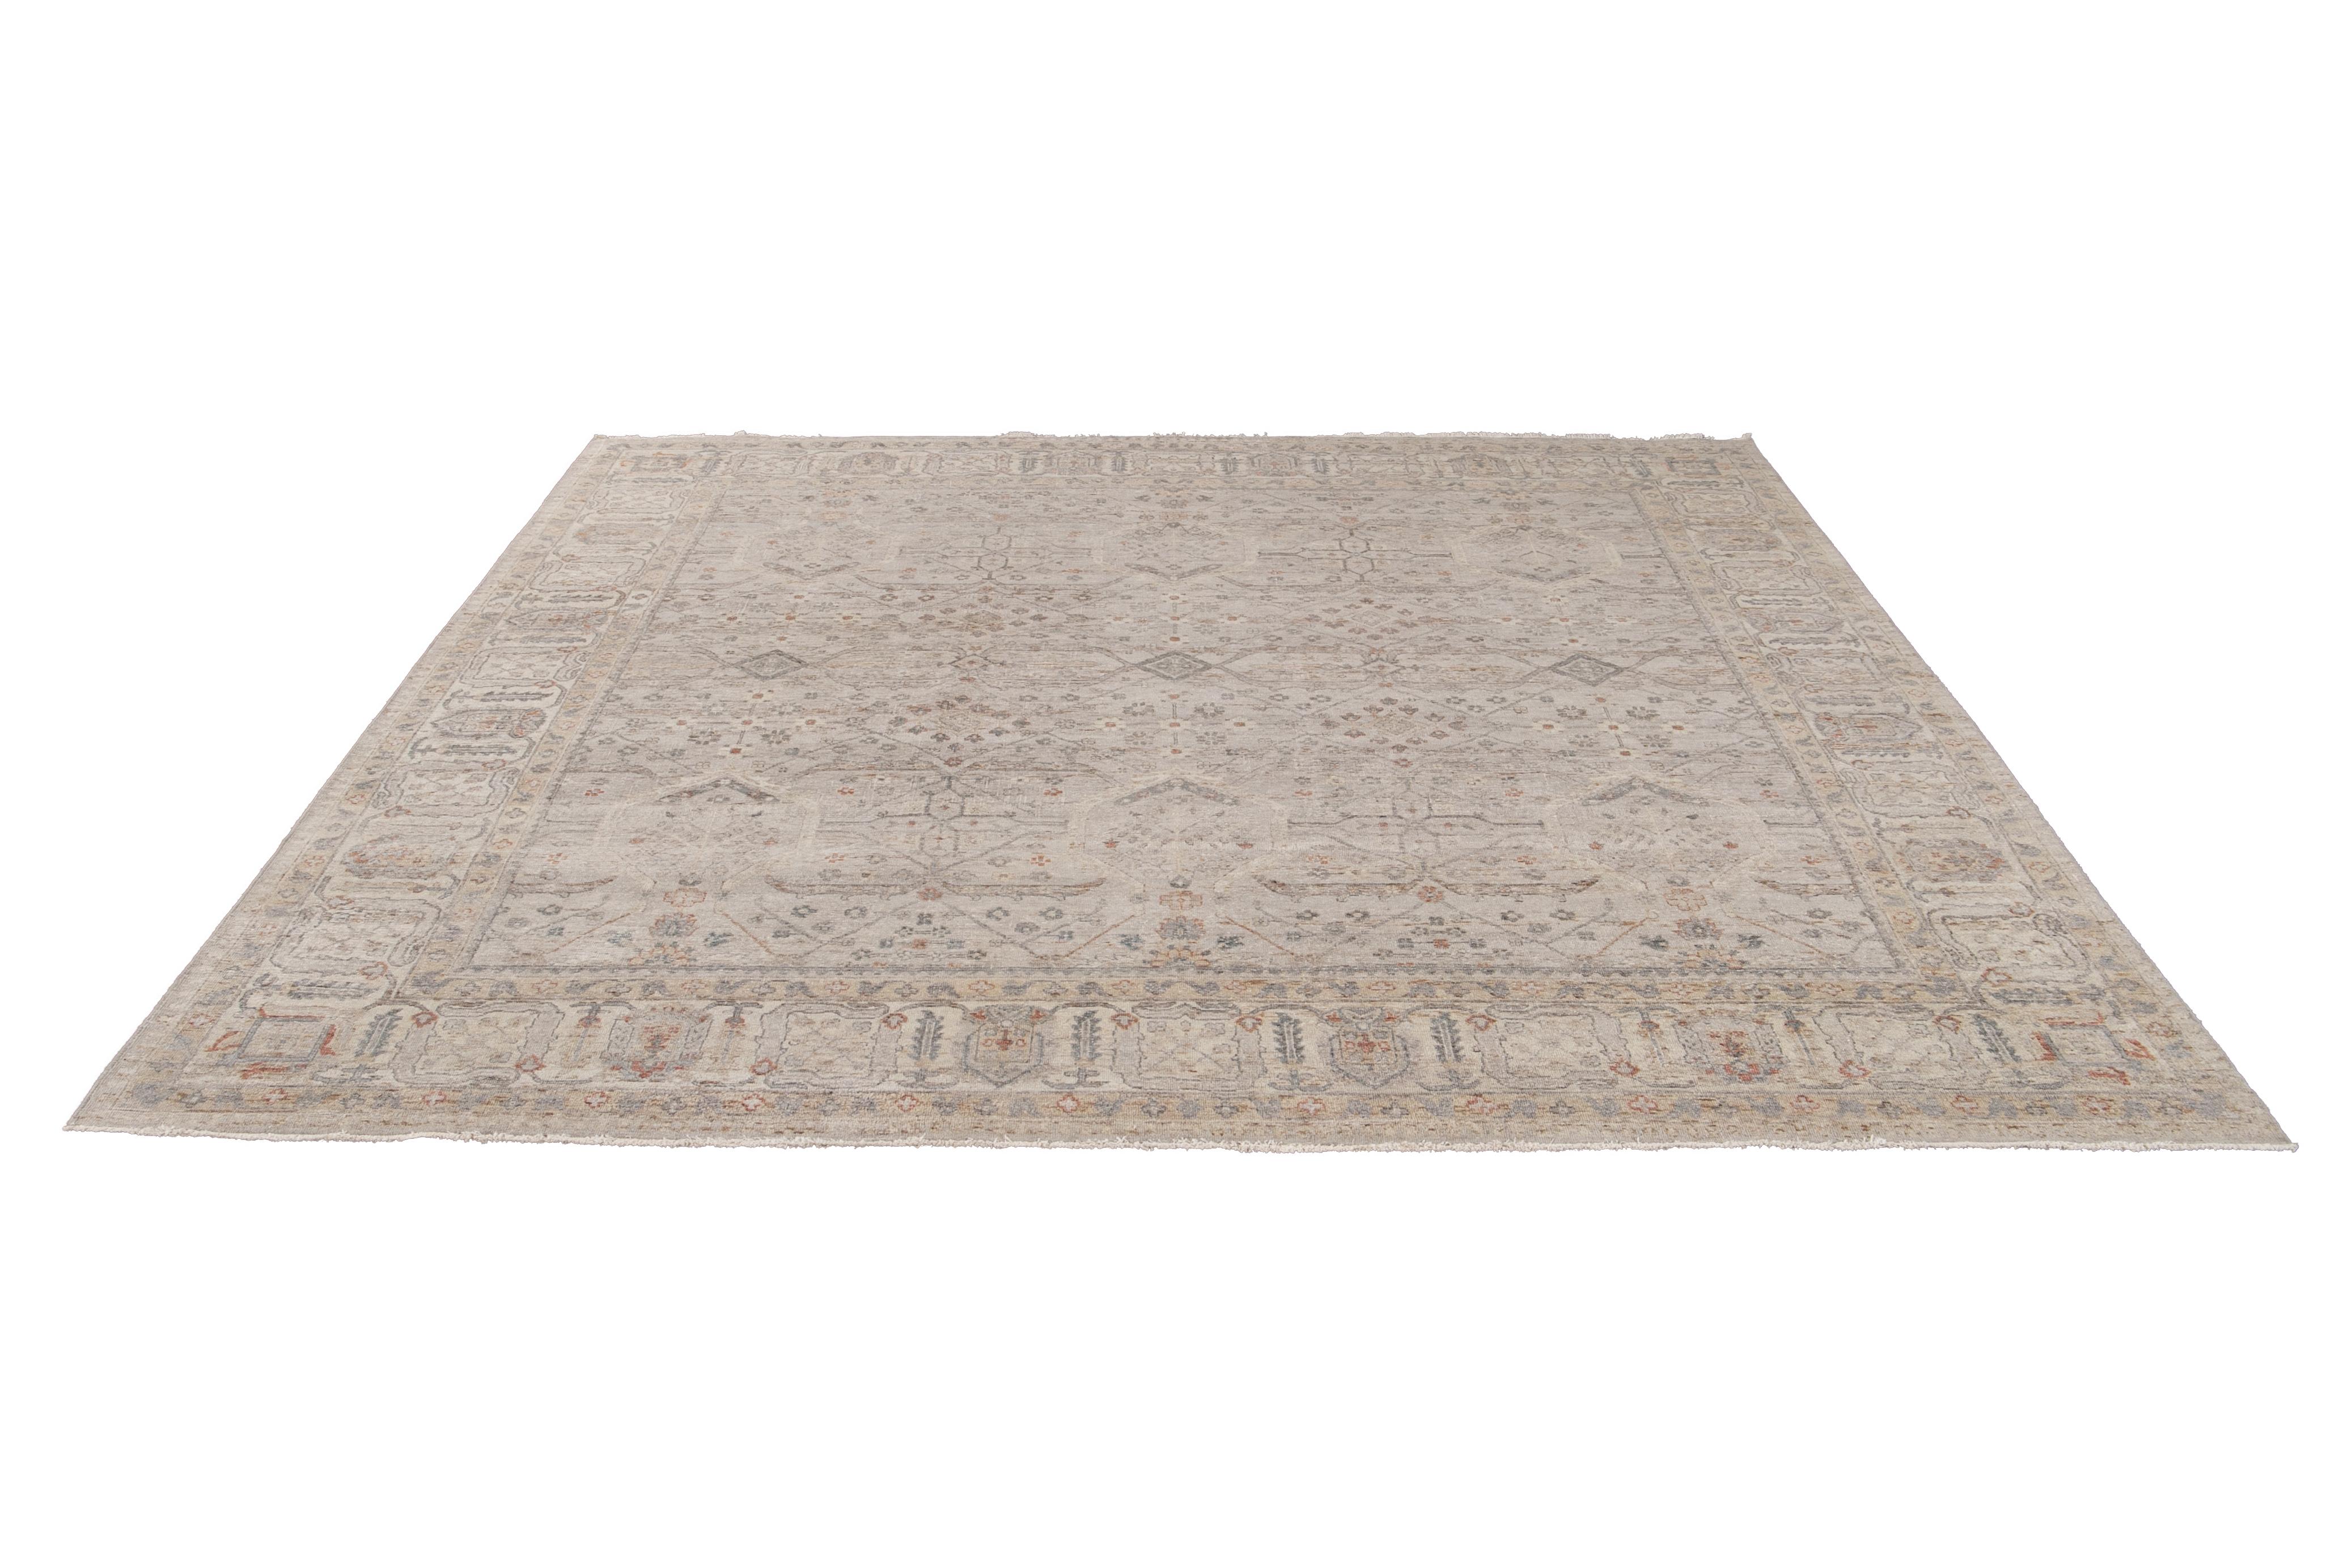 21st Century Contemporary Indian Square Wool Rug 12